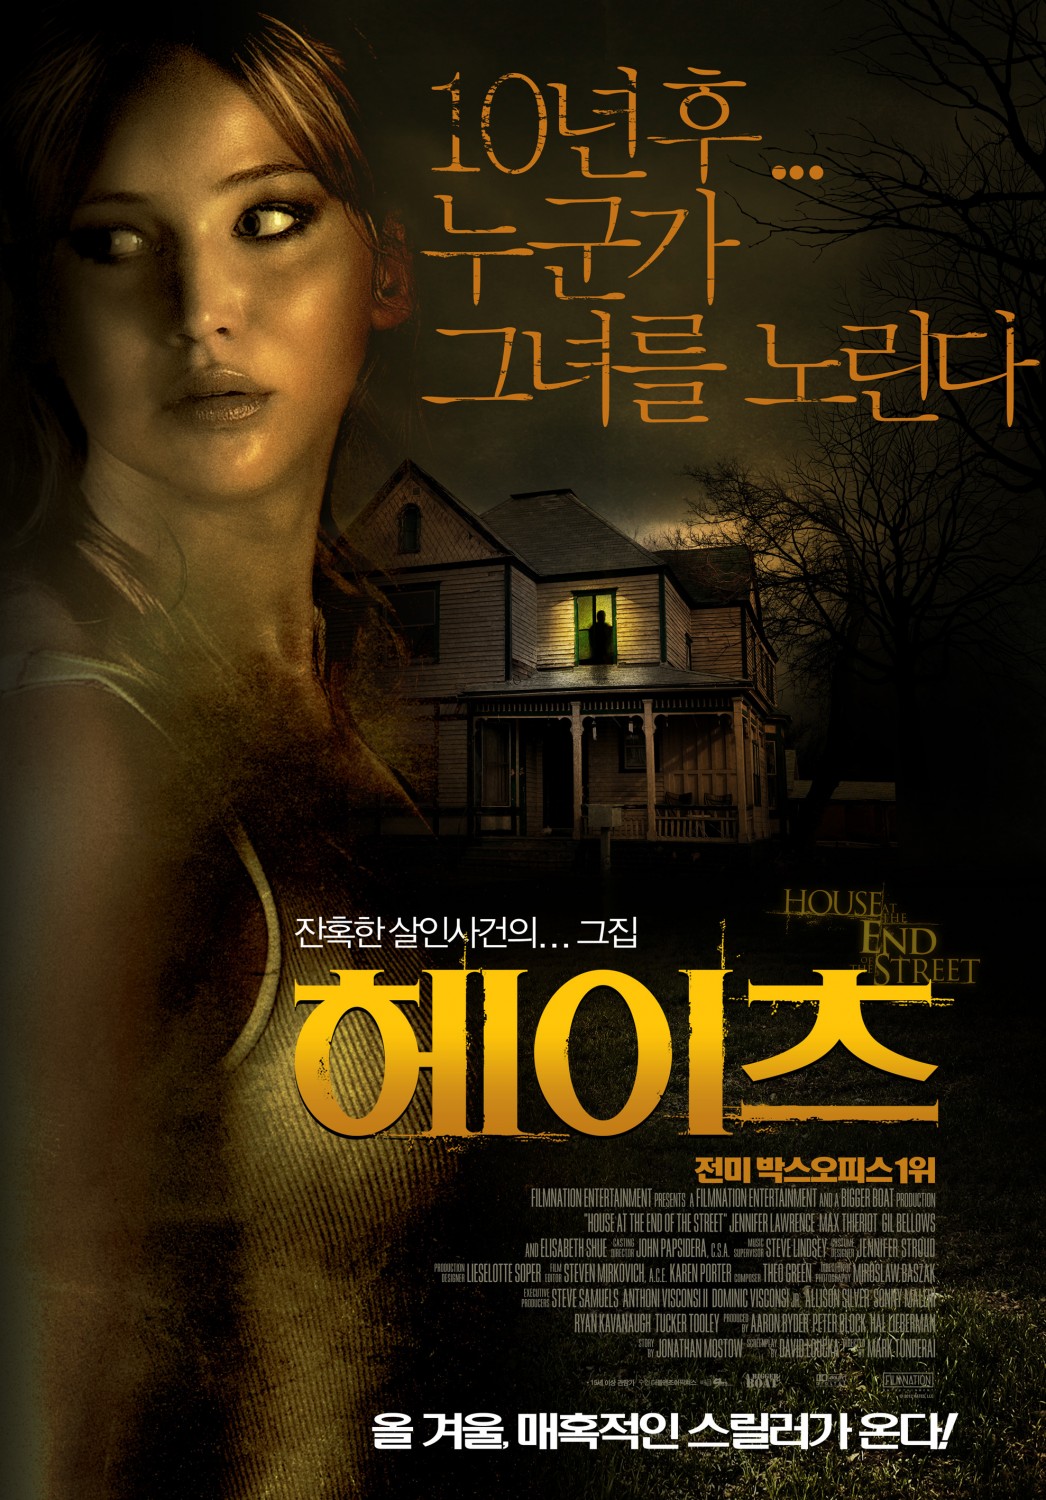 Extra Large Movie Poster Image for House at the End of the Street (#2 of 2)